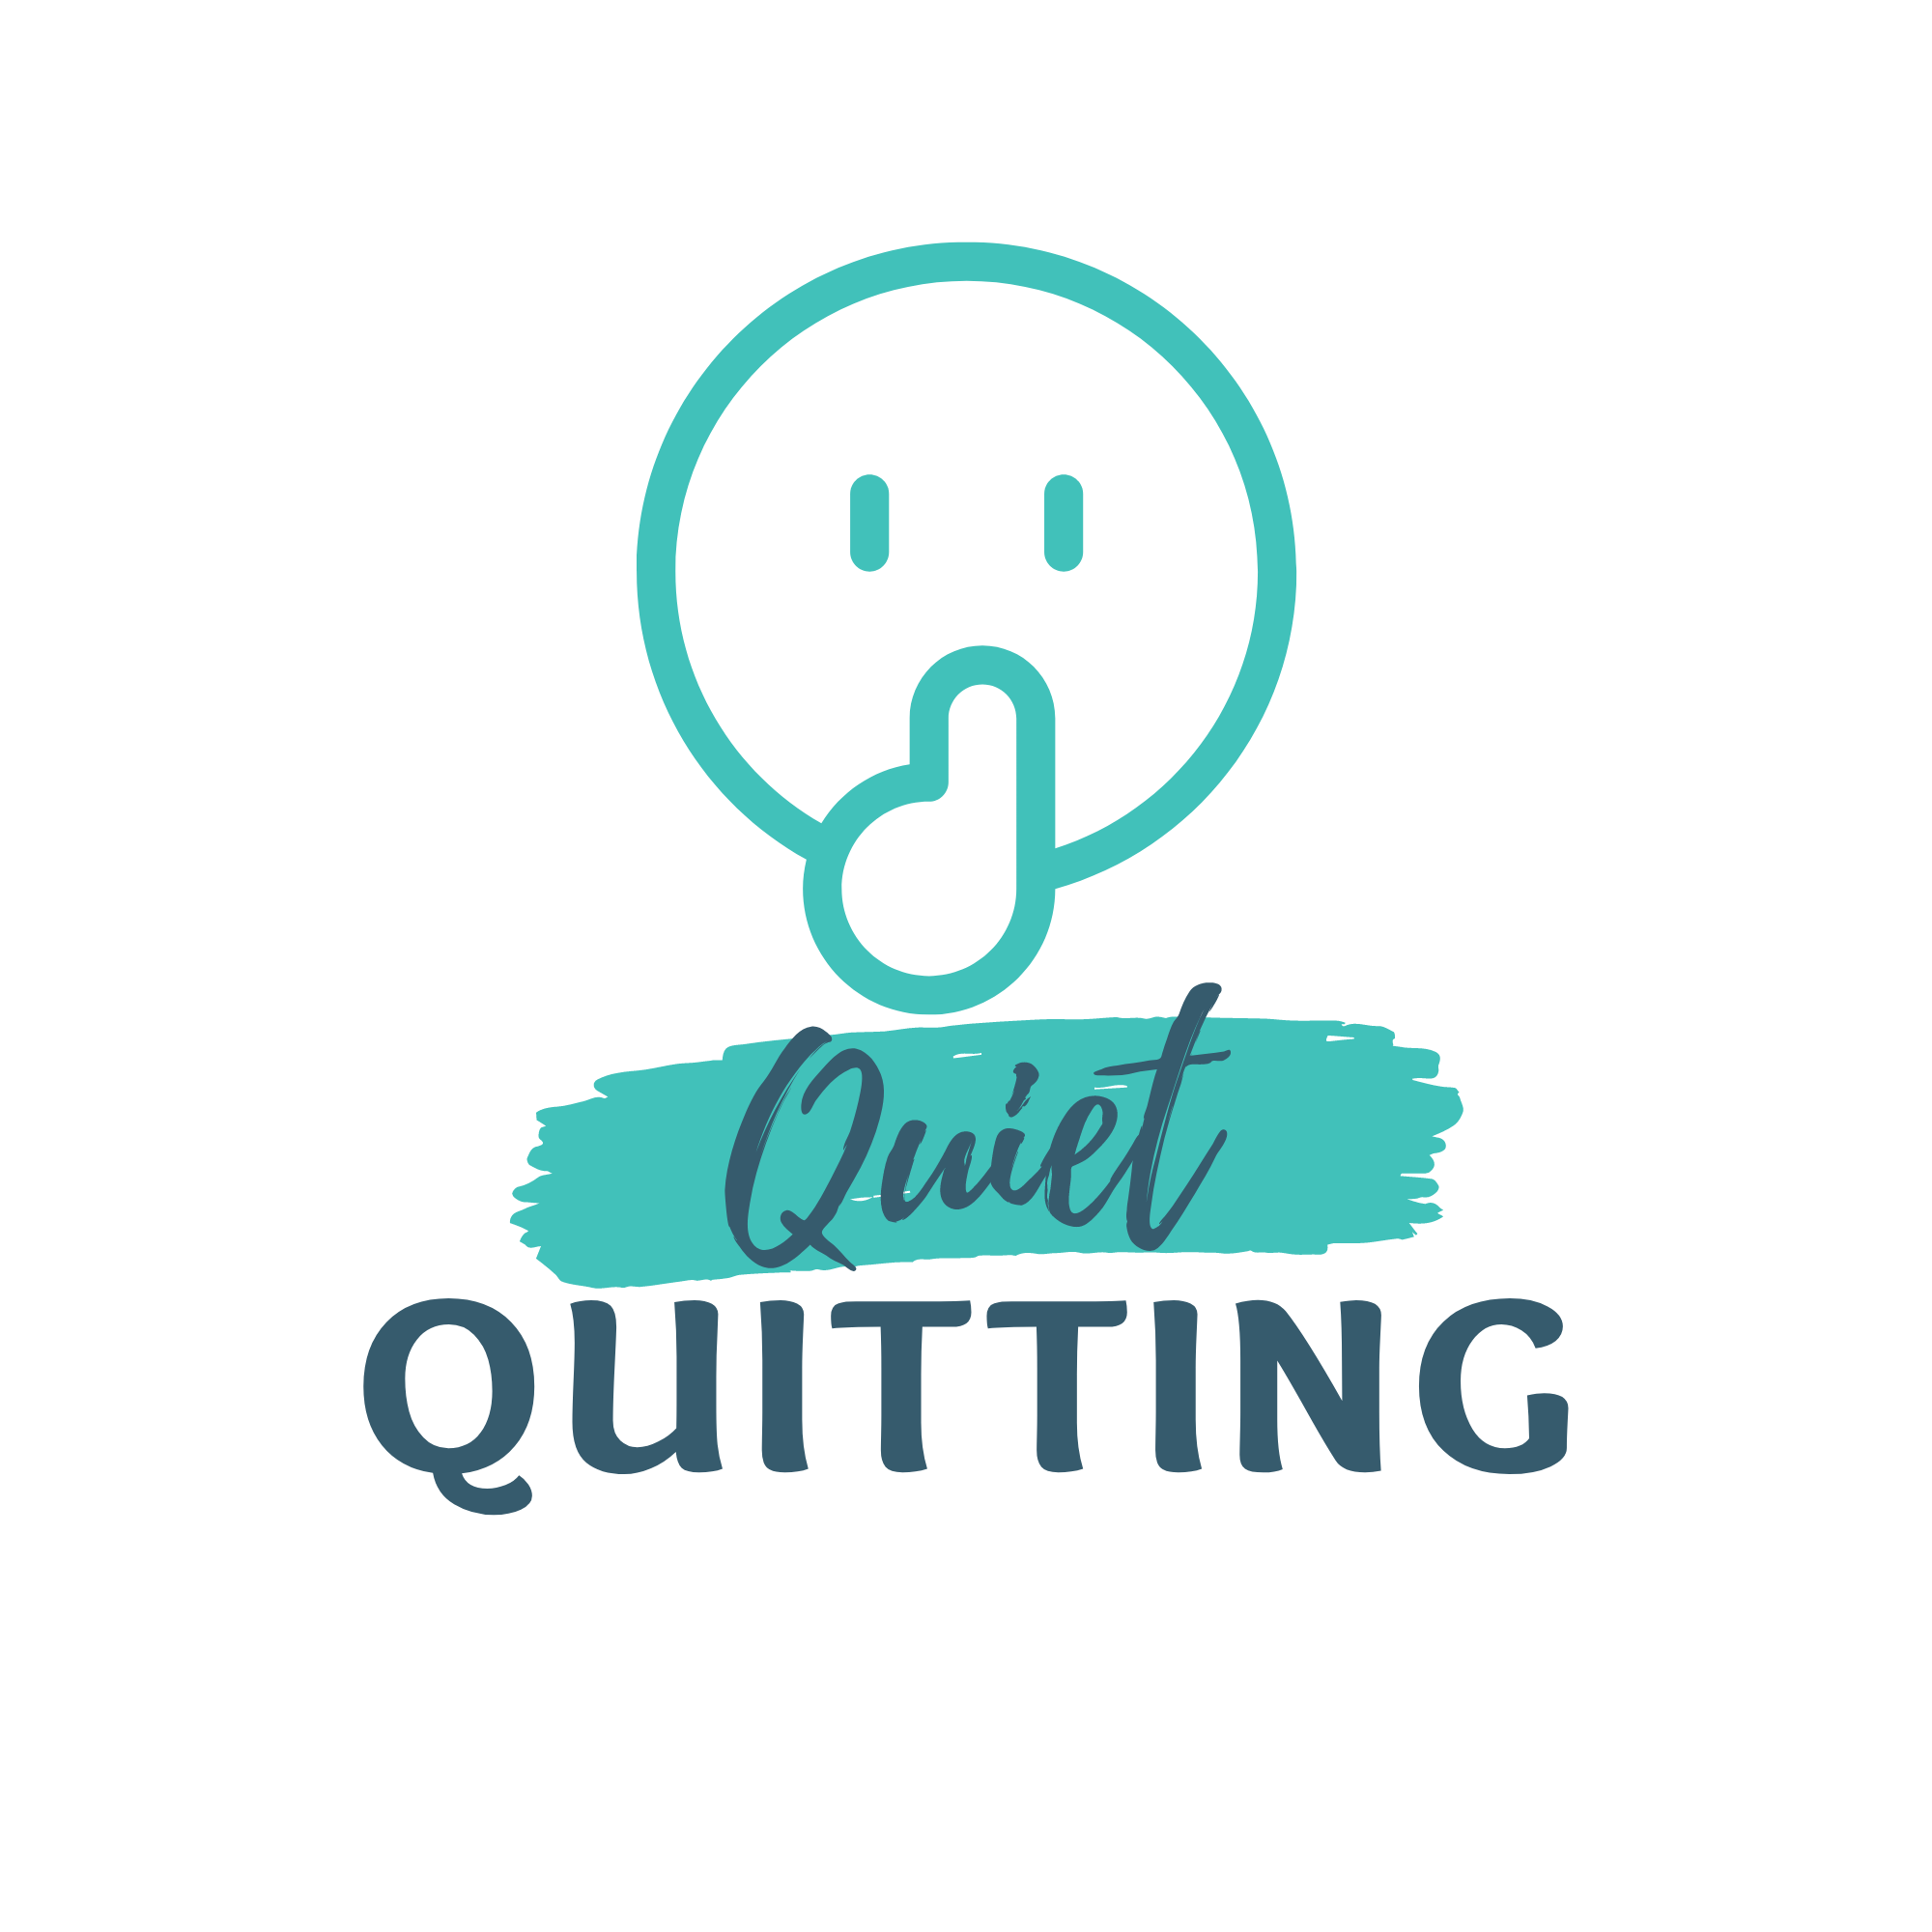 10 Quiet Quitting Graphic T-shirts cover image.